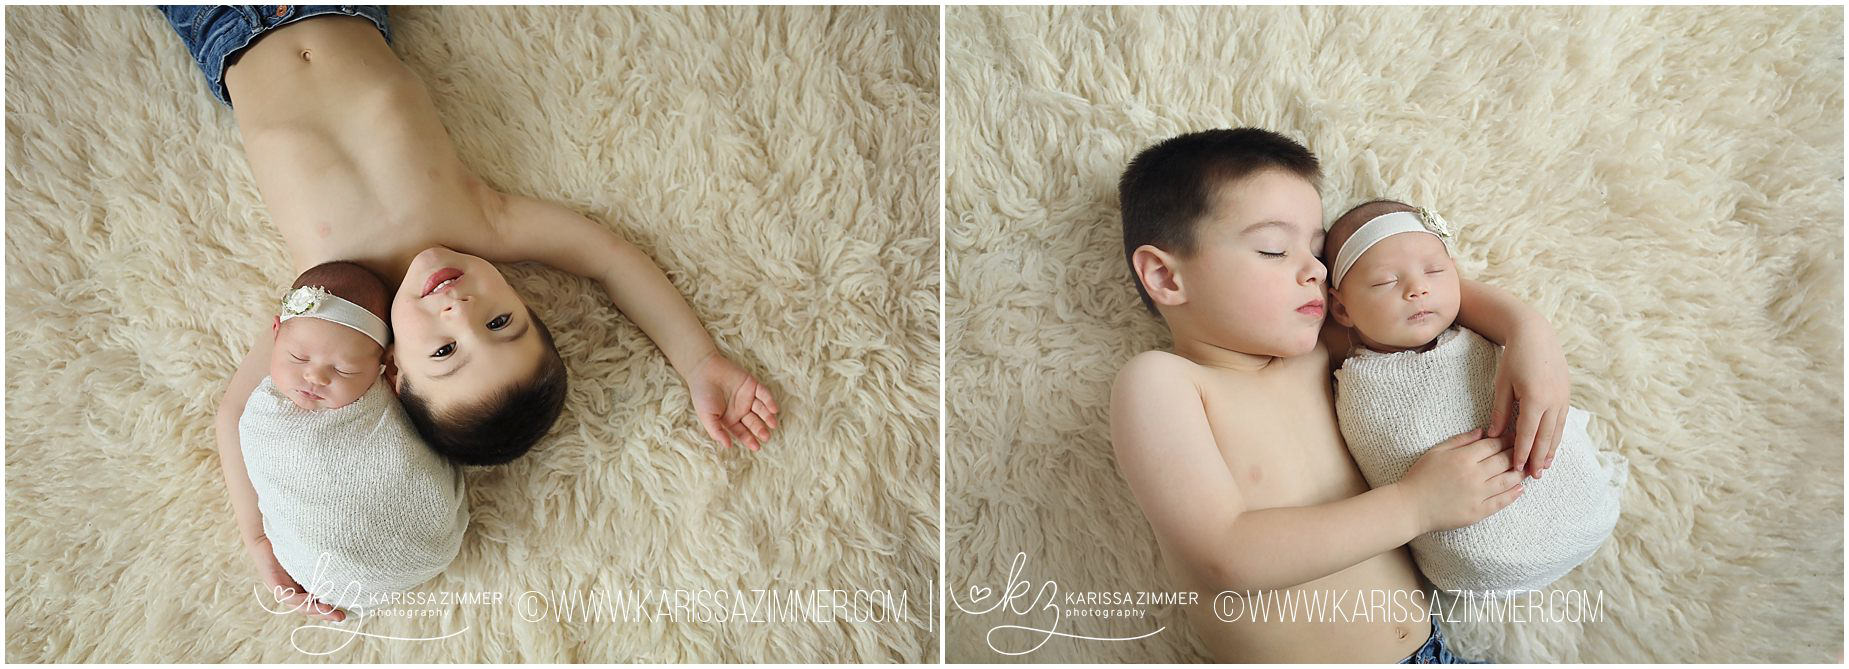 sibling with newborn sister photography